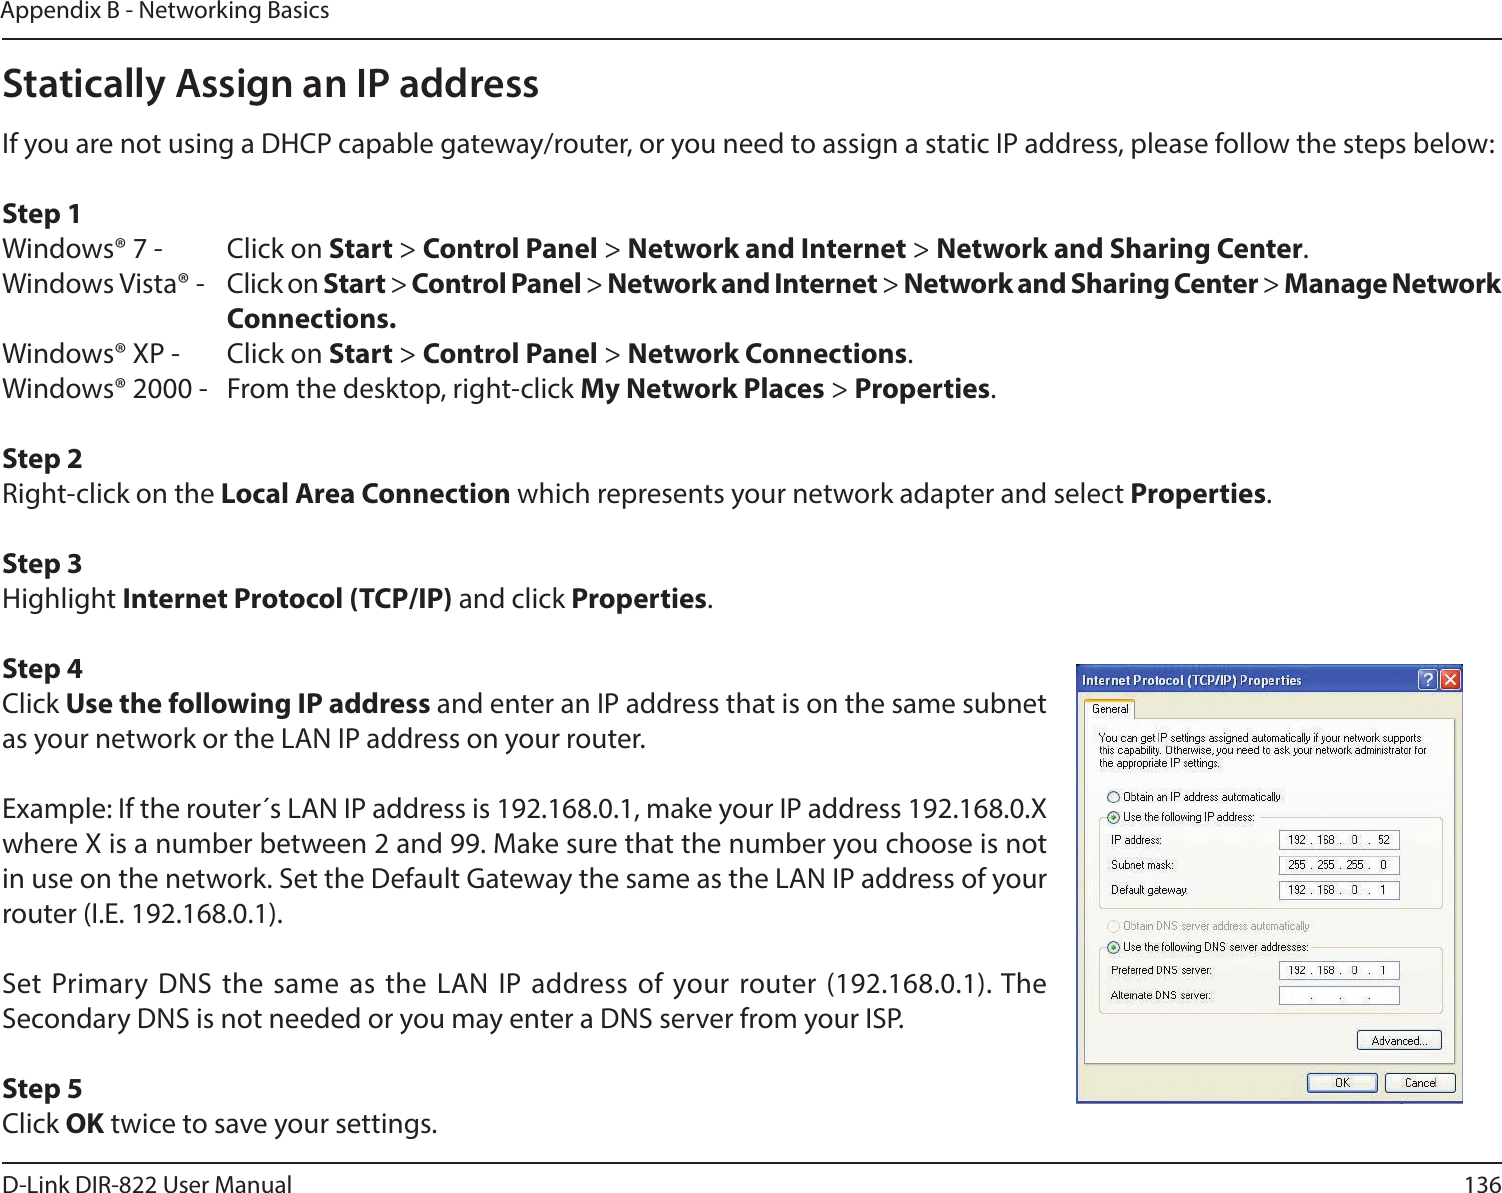 136D-Link DIR-822 User ManualAppendix B - Networking BasicsStatically Assign an IP addressIf you are not using a DHCP capable gateway/router, or you need to assign a static IP address, please follow the steps below:Step 1Windows® 7 -  Click on Start &gt; Control Panel &gt; Network and Internet &gt; Network and Sharing Center.Windows Vista® -  Click on Start &gt; Control Panel &gt; Network and Internet &gt; Network and Sharing Center &gt; Manage Network    Connections.Windows® XP -  Click on Start &gt; Control Panel &gt; Network Connections.Windows® 2000 -  From the desktop, right-click My Network Places &gt; Properties.Step 2Right-click on the LocalAreaConnection which represents your network adapter and select Properties.Step 3Highlight InternetProtocol(TCP/IP) and click Properties.Step 4Click Use the following IP address and enter an IP address that is on the same subnet as your network or the LAN IP address on your router. Example: If the router´s LAN IP address is 192.168.0.1, make your IP address 192.168.0.X where X is a number between 2 and 99. Make sure that the number you choose is not in use on the network. Set the Default Gateway the same as the LAN IP address of your router (I.E. 192.168.0.1). Set Primary DNS the same as the LAN IP address of your router (192.168.0.1). The Secondary DNS is not needed or you may enter a DNS server from your ISP.Step 5Click OK twice to save your settings.